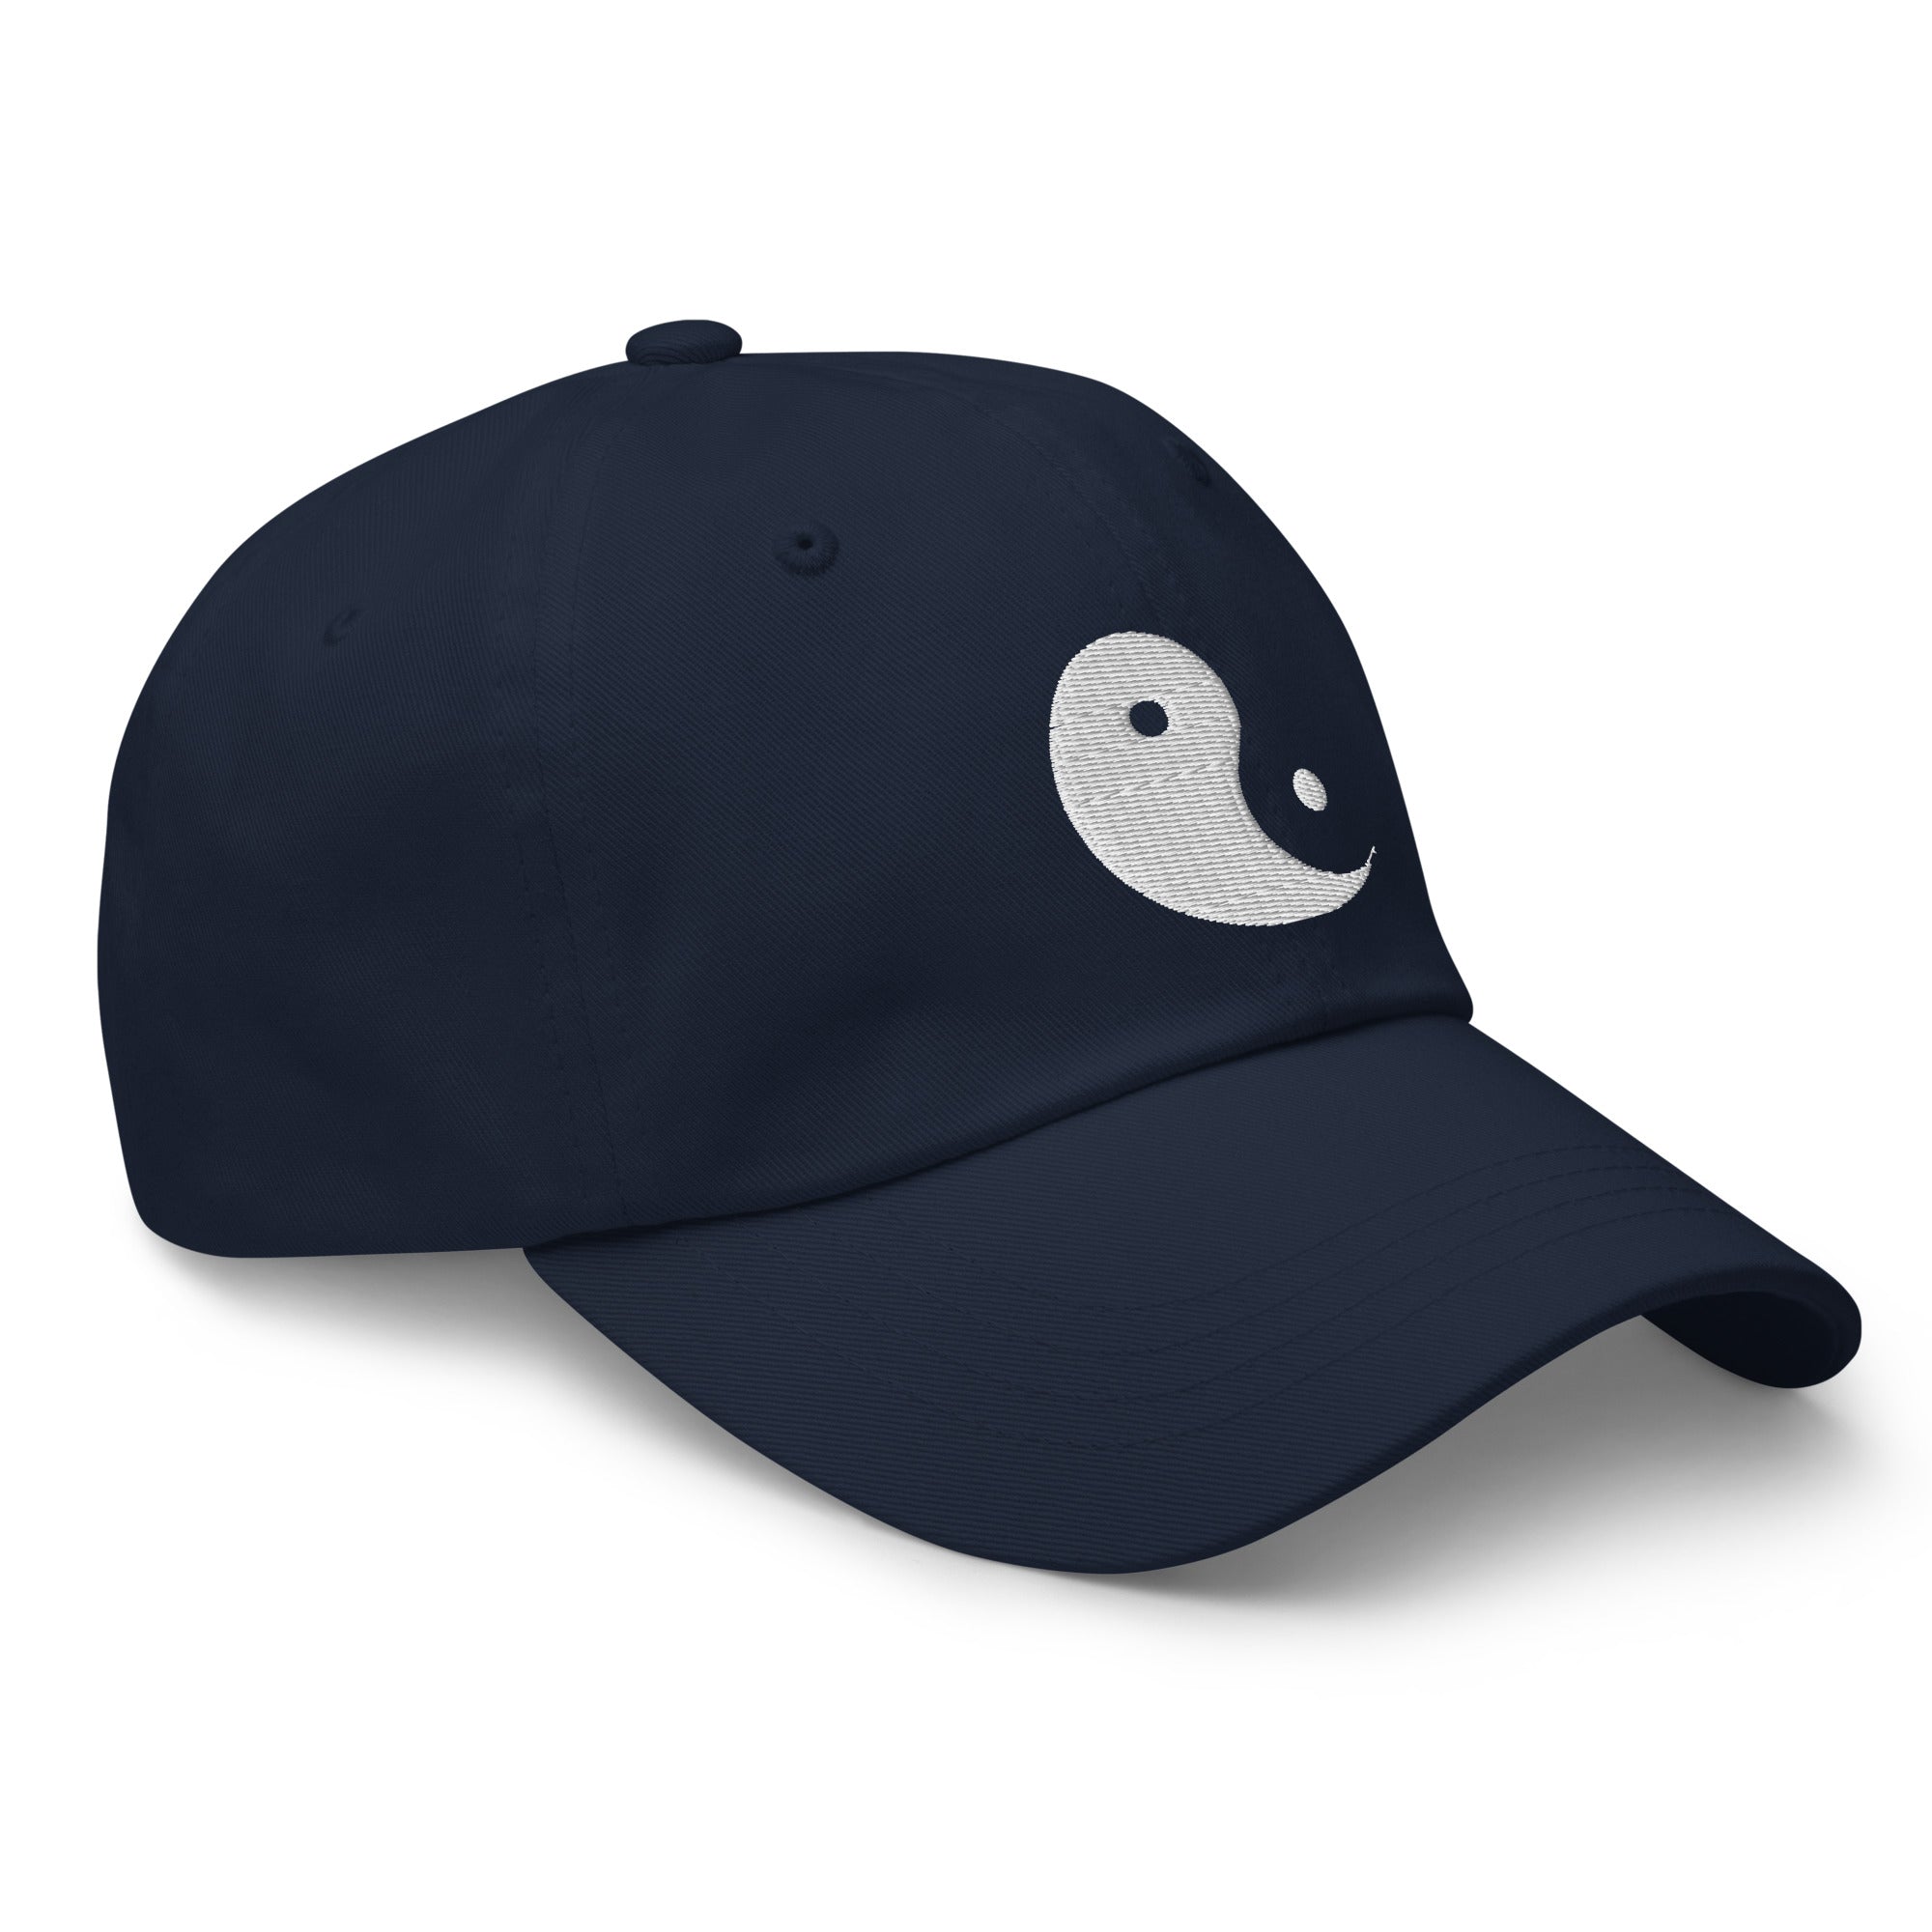 Embroidered Ying Yang Cap